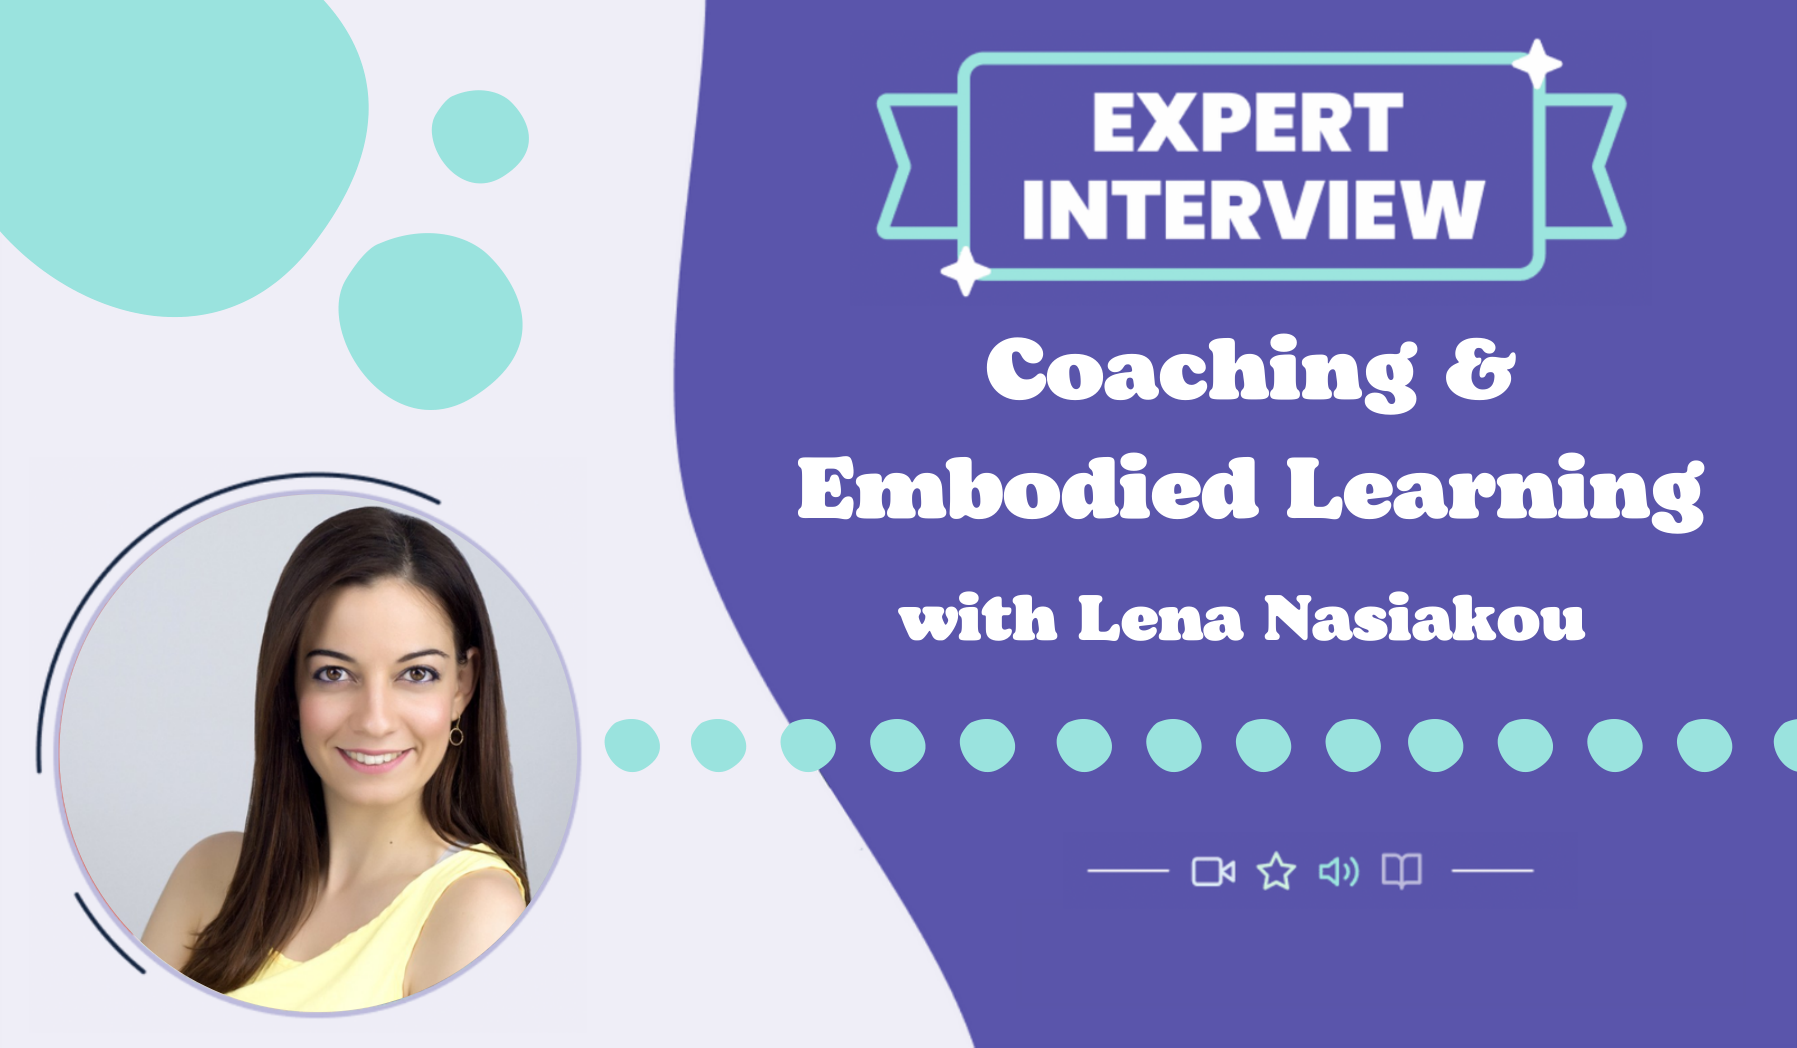 Coaching & Embodied Learning with Lena Nasiakou